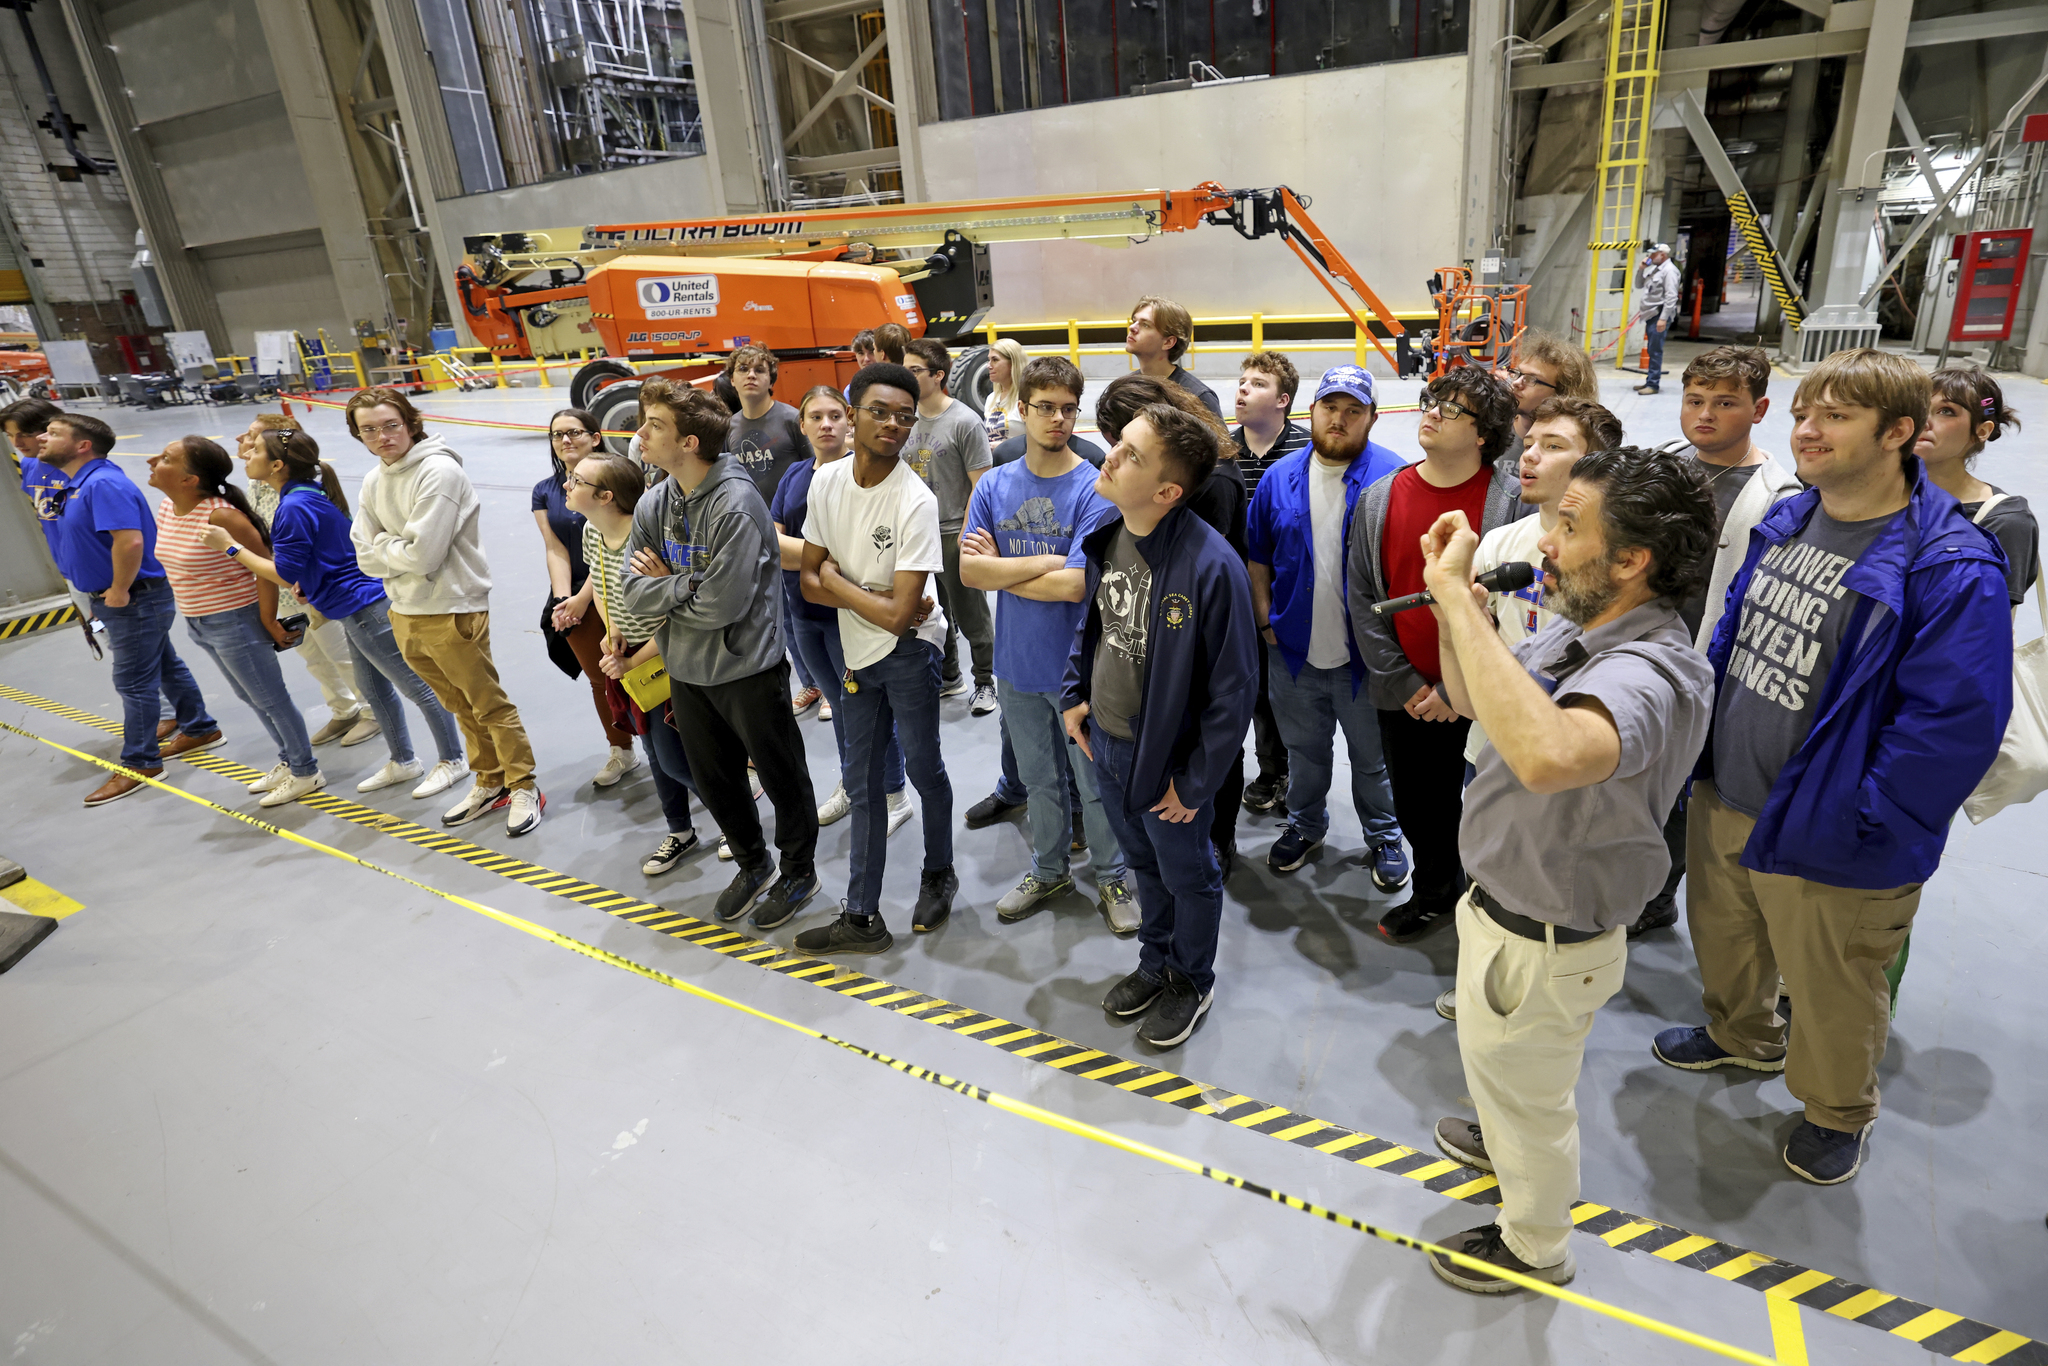 A group of students stand on a concrete floor behind yellow and black striped tape on the ground as a employee gives a tour with a microphone.